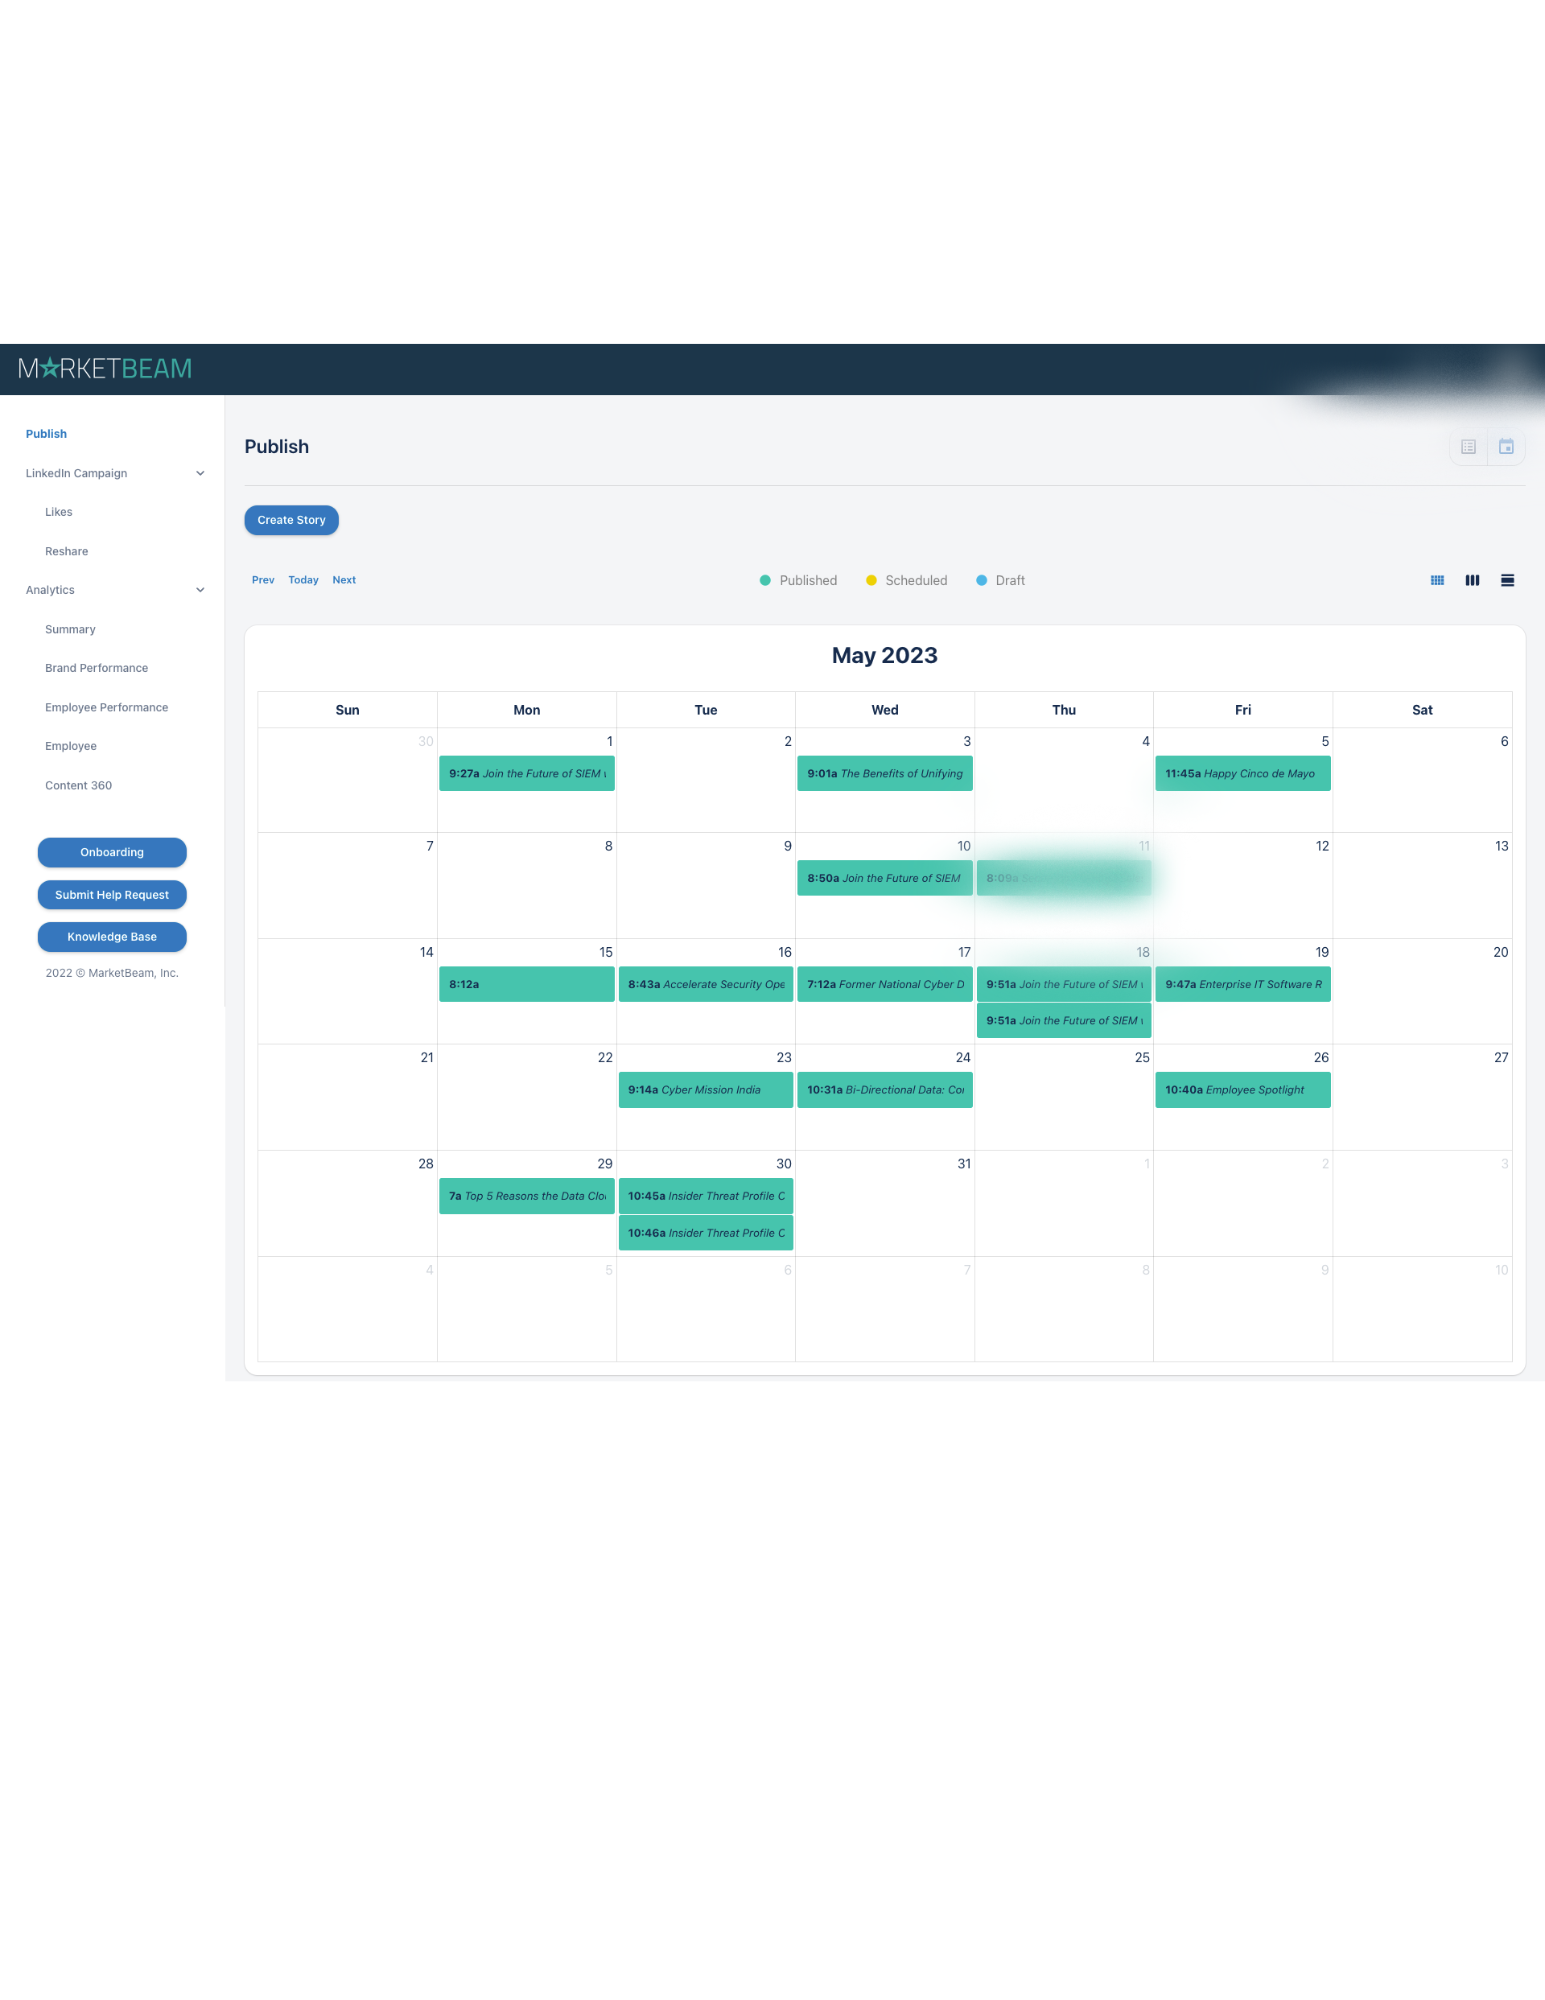 Plan and execute your social strategy effortlessly with MarketBeam's Social Media Calendar. Schedule posts, view planned content at a glance, and streamline your workflow for a more effective social media management.